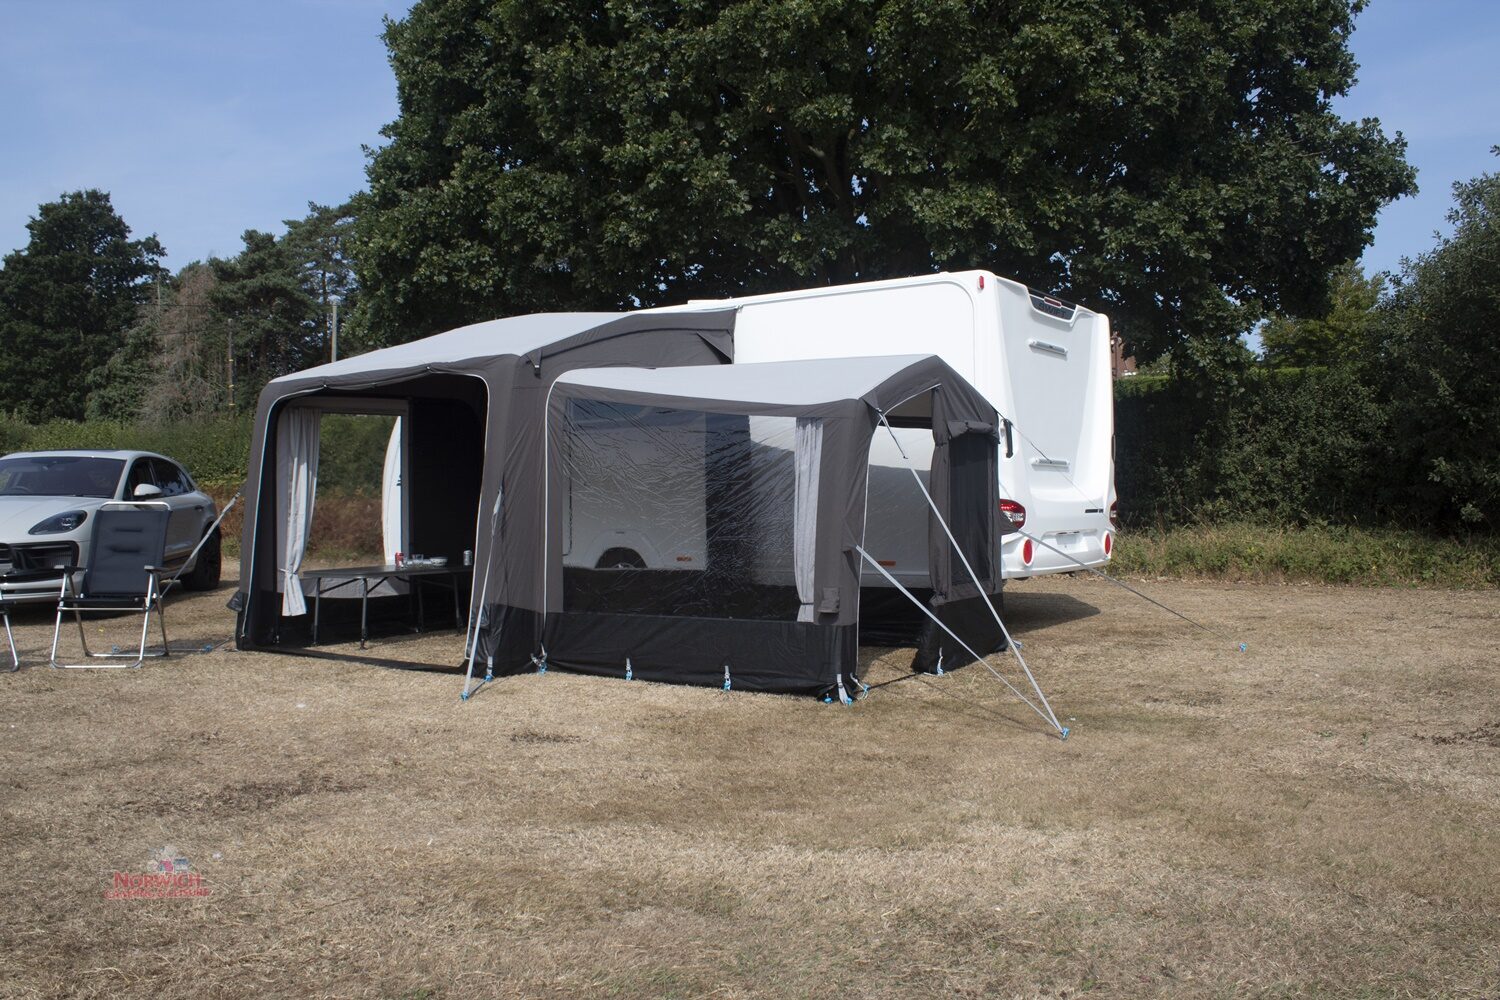 Telta Extra Tall Annexe Norwich Camping Ae0001 1